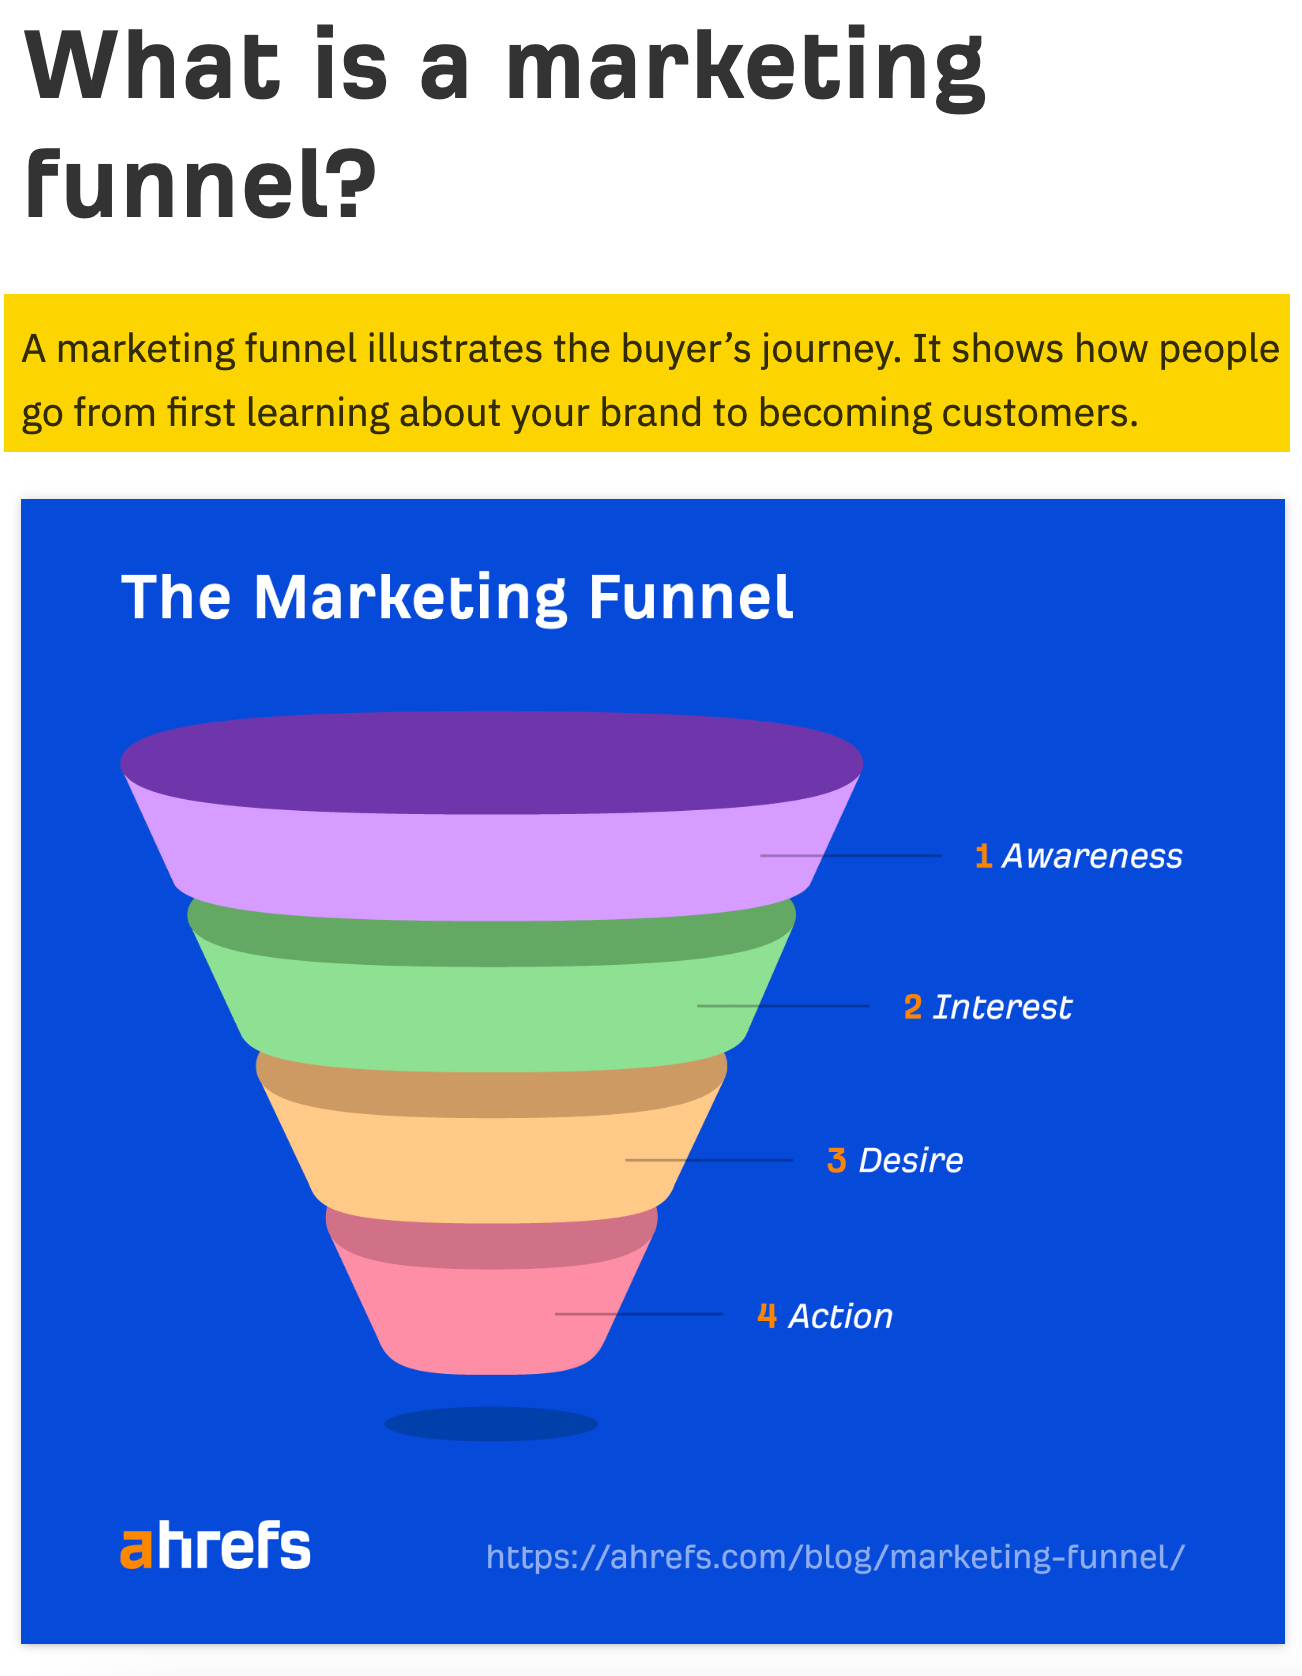 Explanation of a marketing funnel